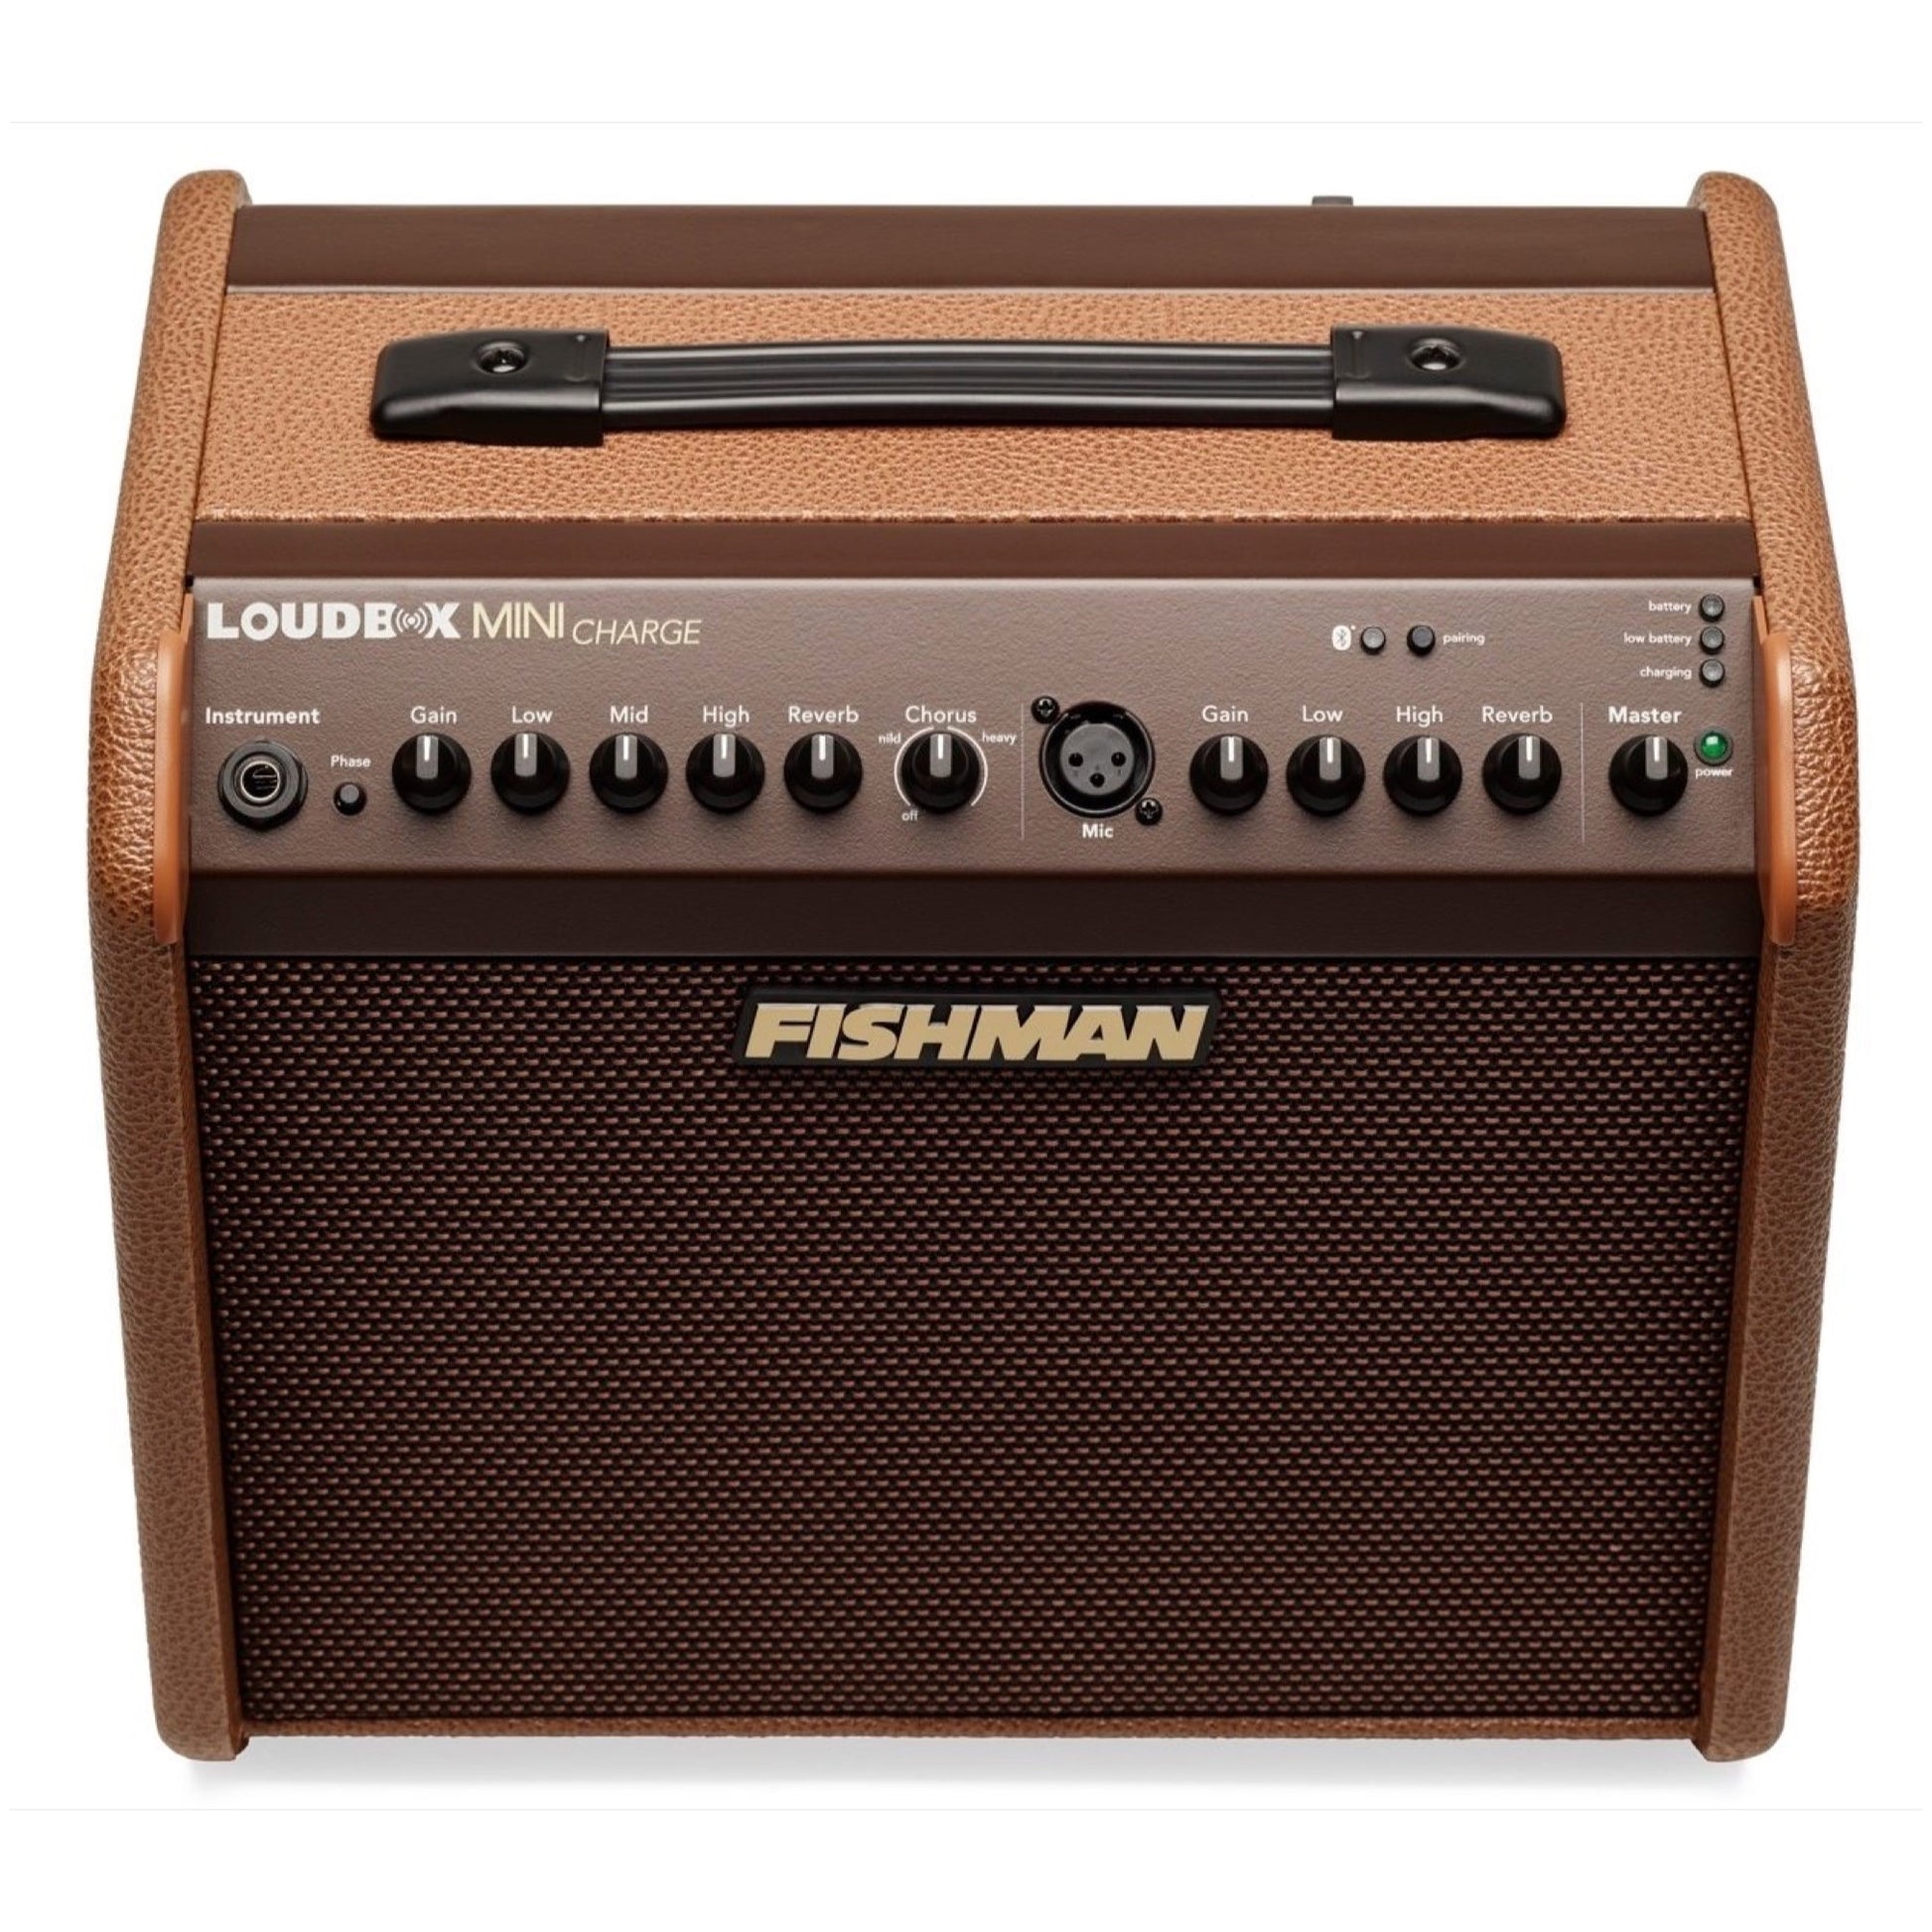 Fishman Loudbox Mini Charge Acoustic Guitar Amplifier with Bluetooth